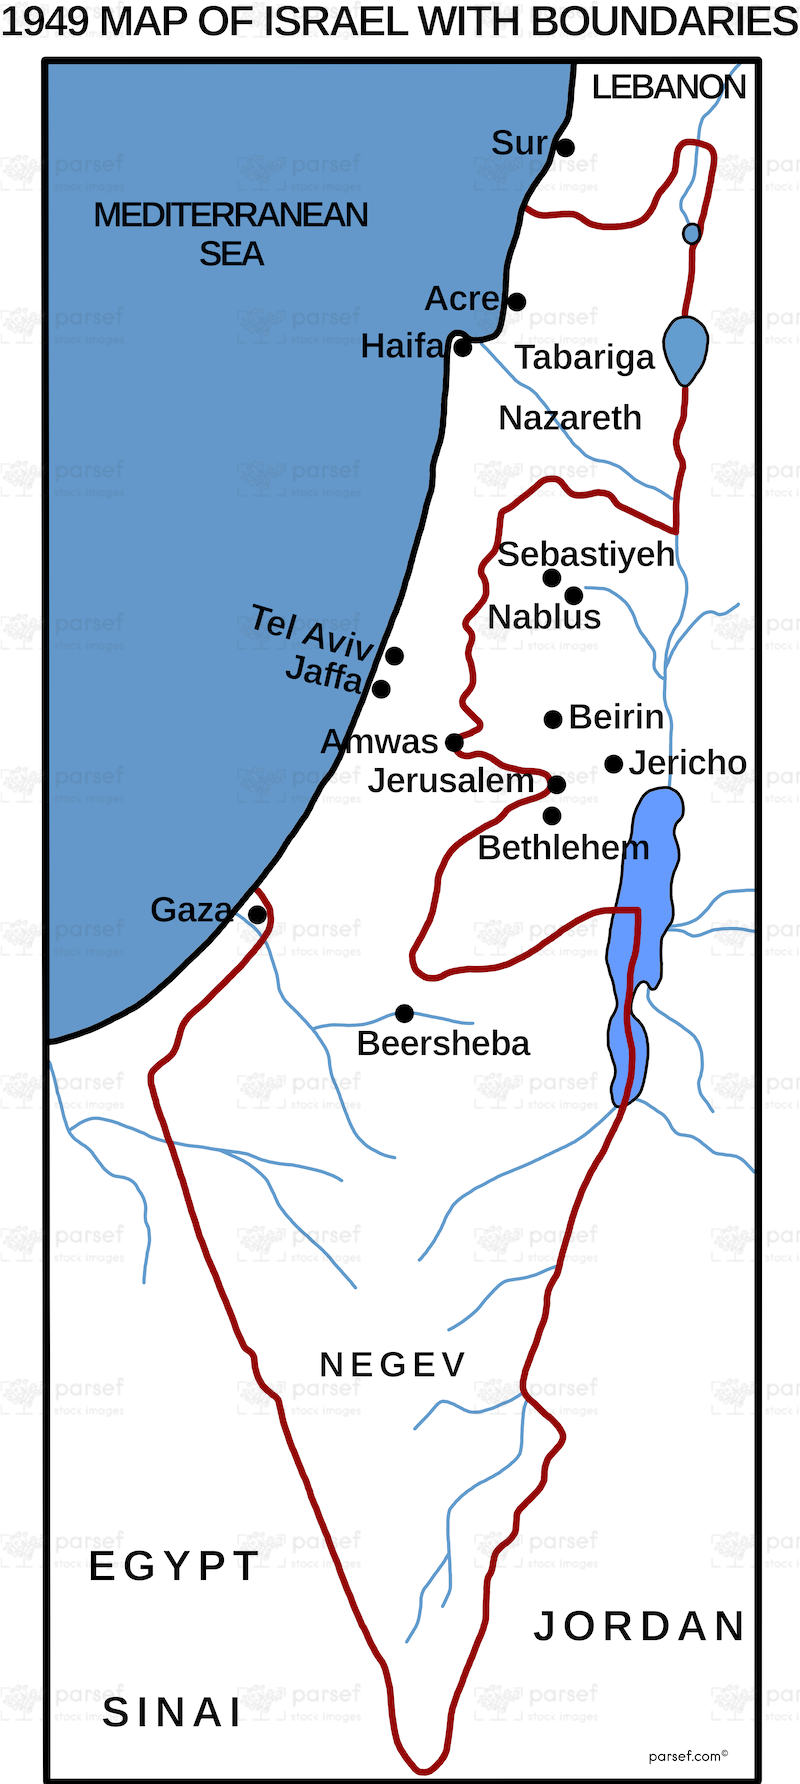 Israel in 1949 With Boundaries Map image